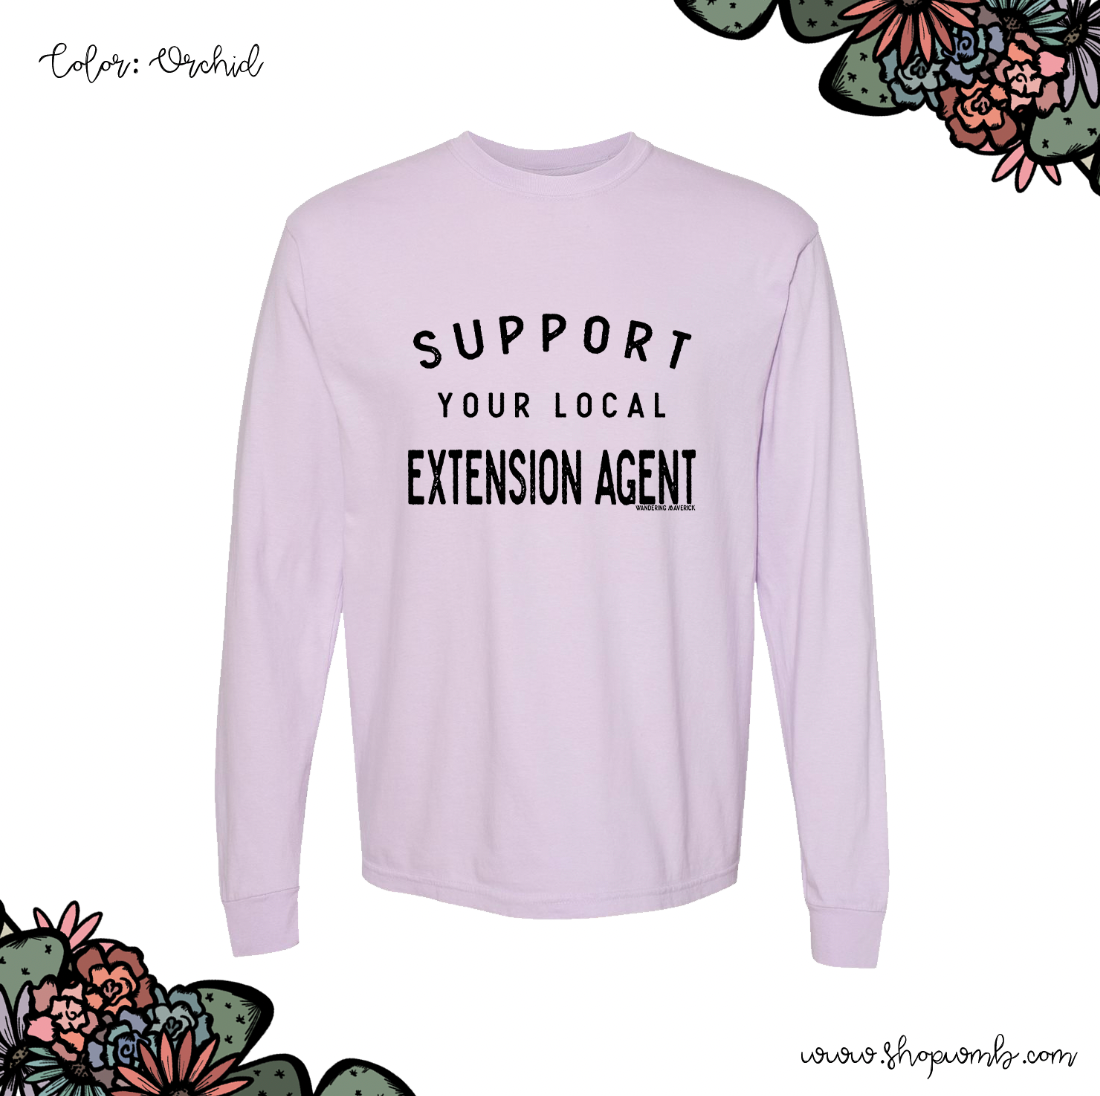 Support You Local Extension Agent LONG SLEEVE T-Shirt (S-3XL) - Multiple Colors!